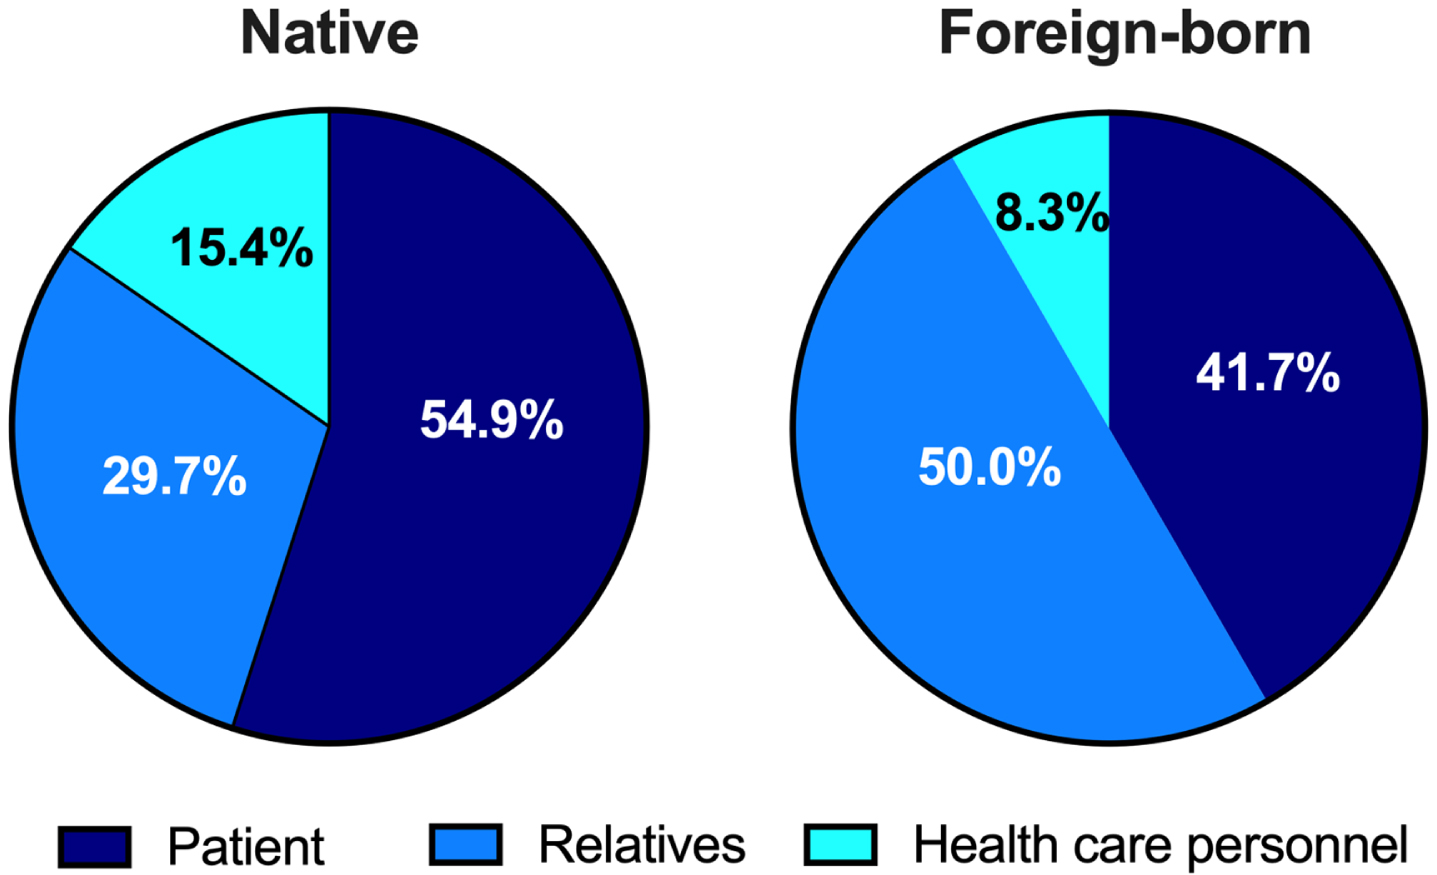 Pie charts showing the distribution concerning who, of three subgroups, initiated contact with health care concerning cognitive problems in natives and foreign-born respectively.